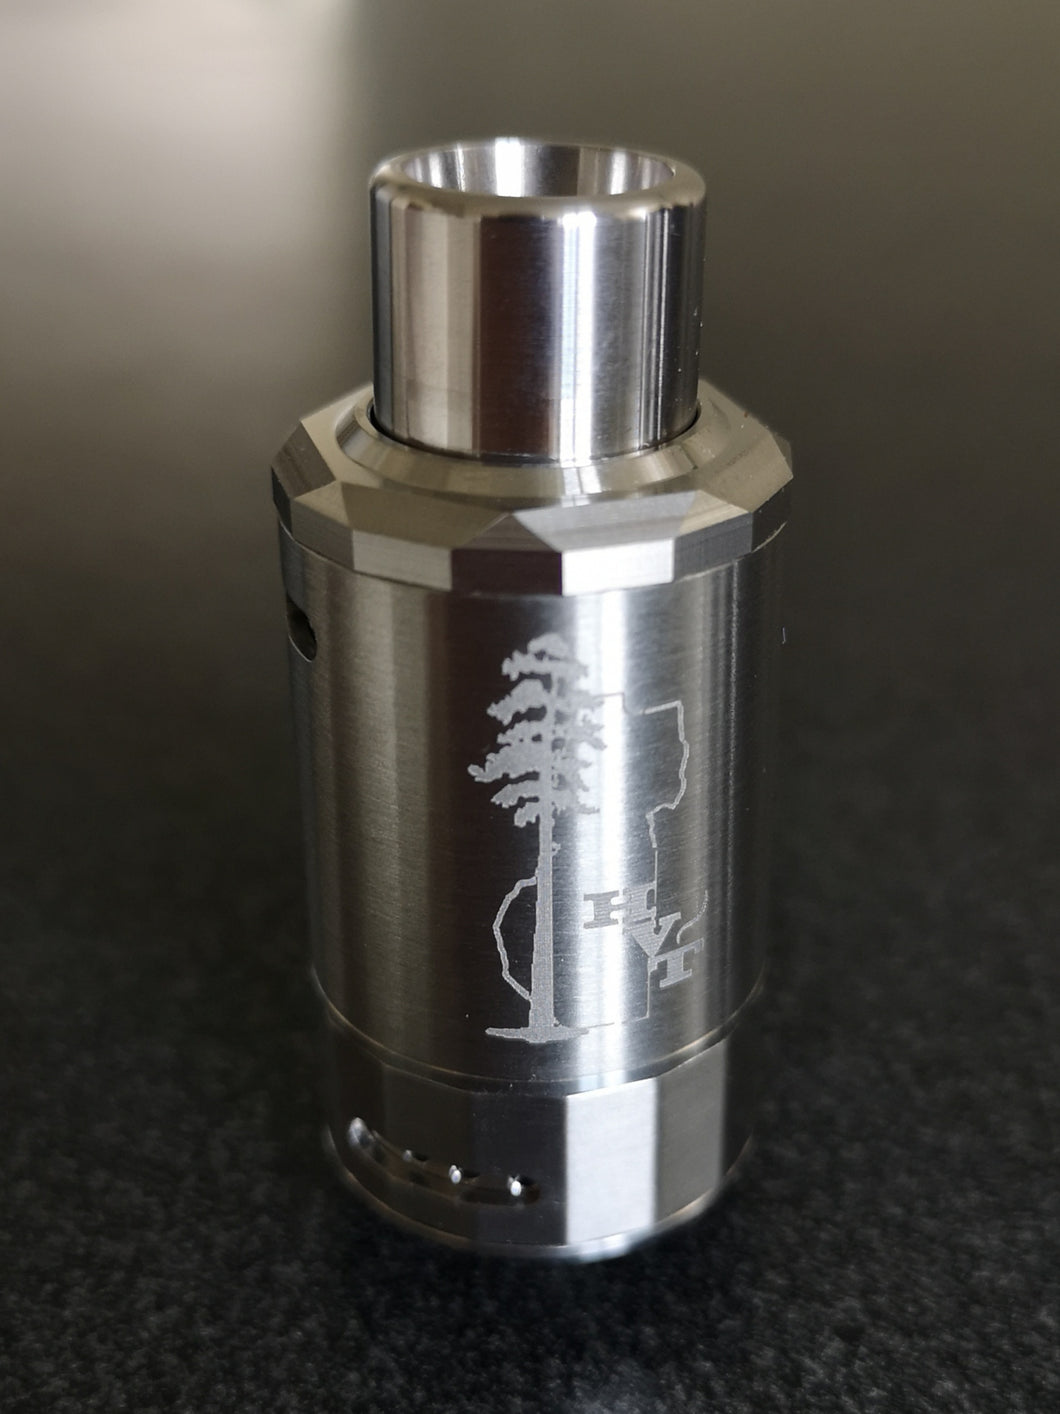 New Sequoia Atomizer by HVT in SS For CBd and aromatherapy - Atomizer Diffuser